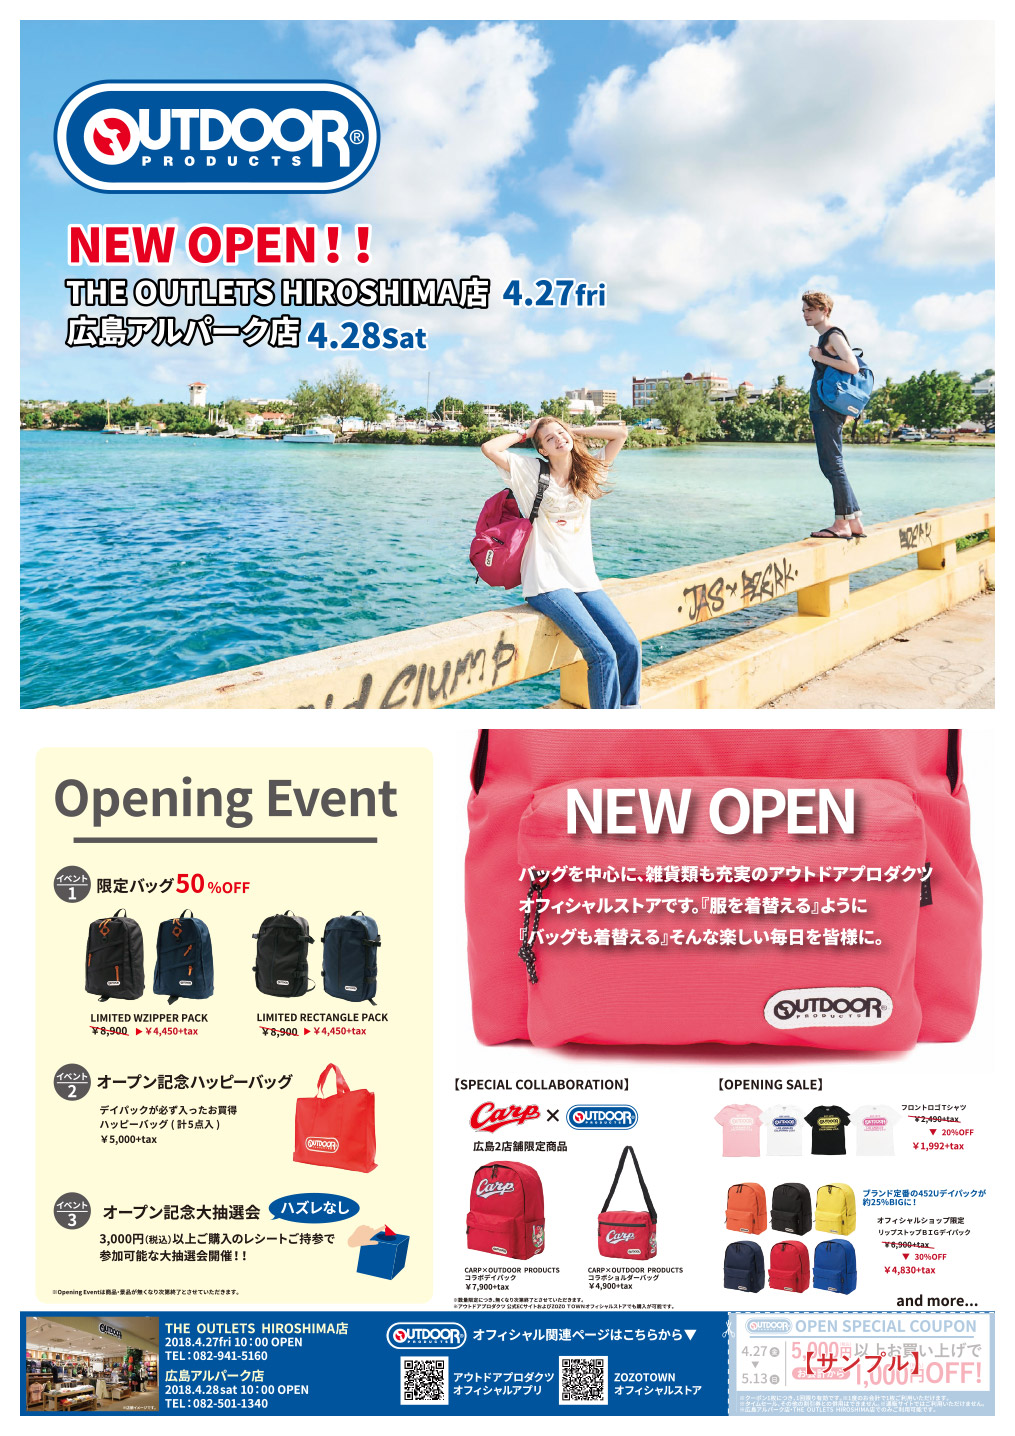 【OUTDOOR PRODUCTS】2SHOP NEW OPEN！オープニングイベント多数！